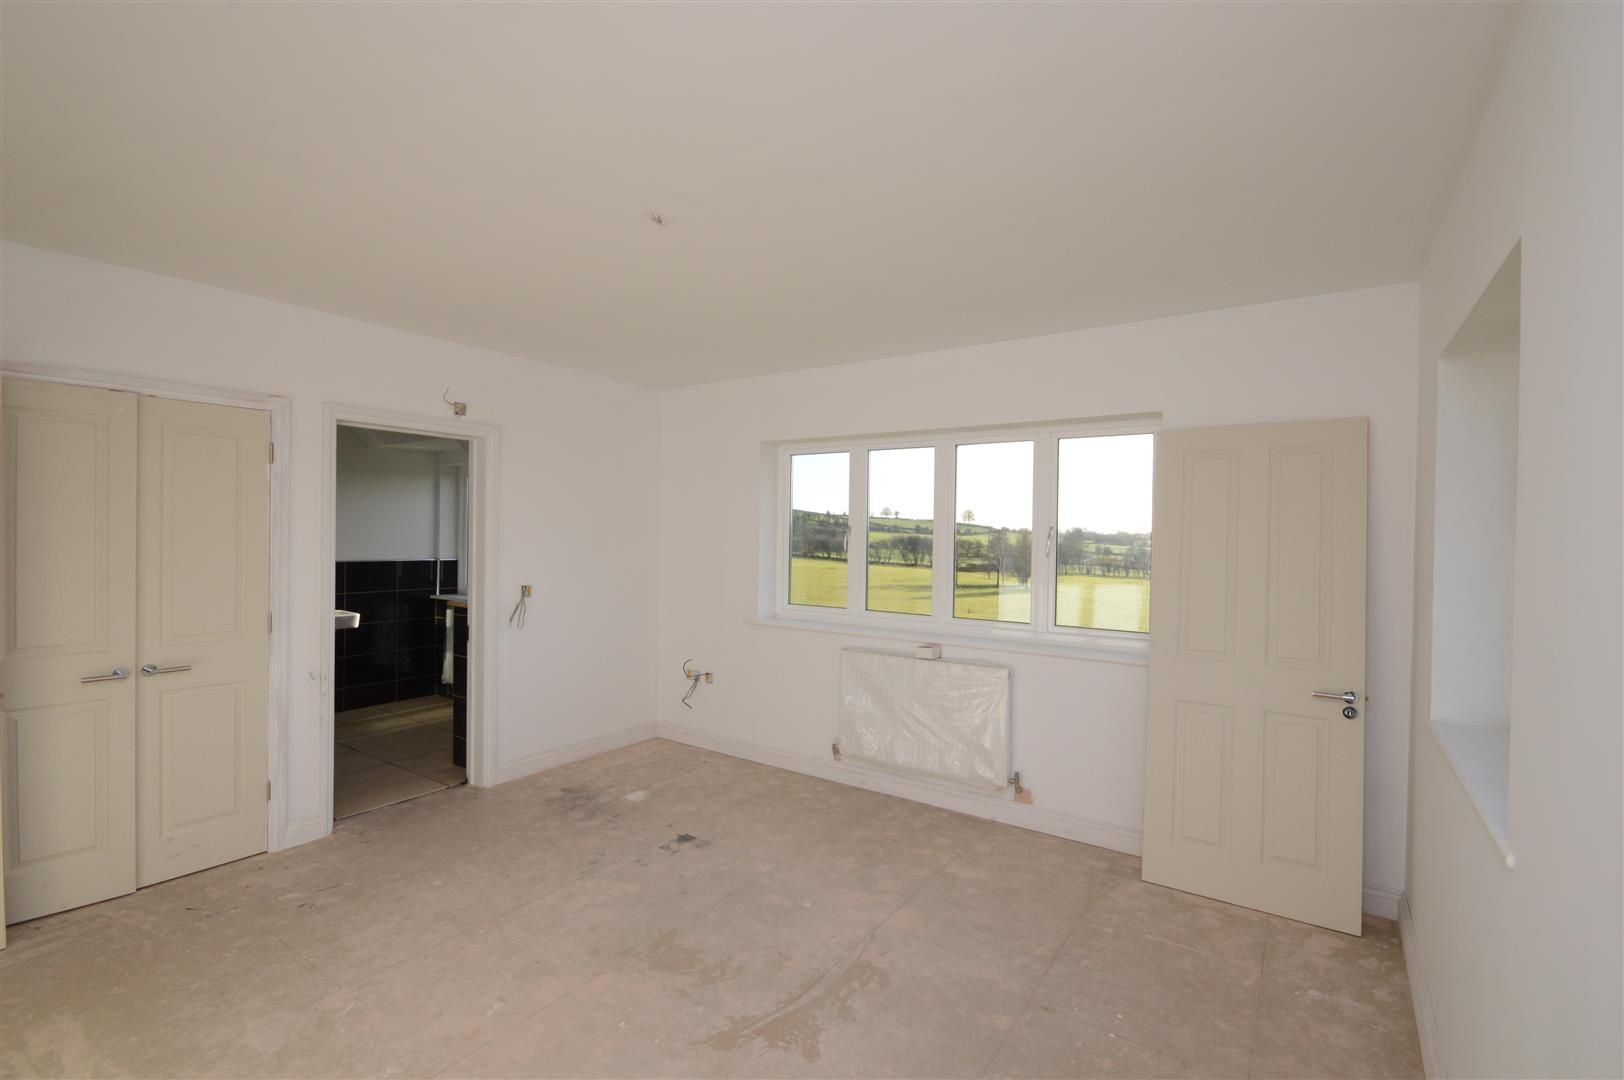 4 bed detached for sale in Marden 12